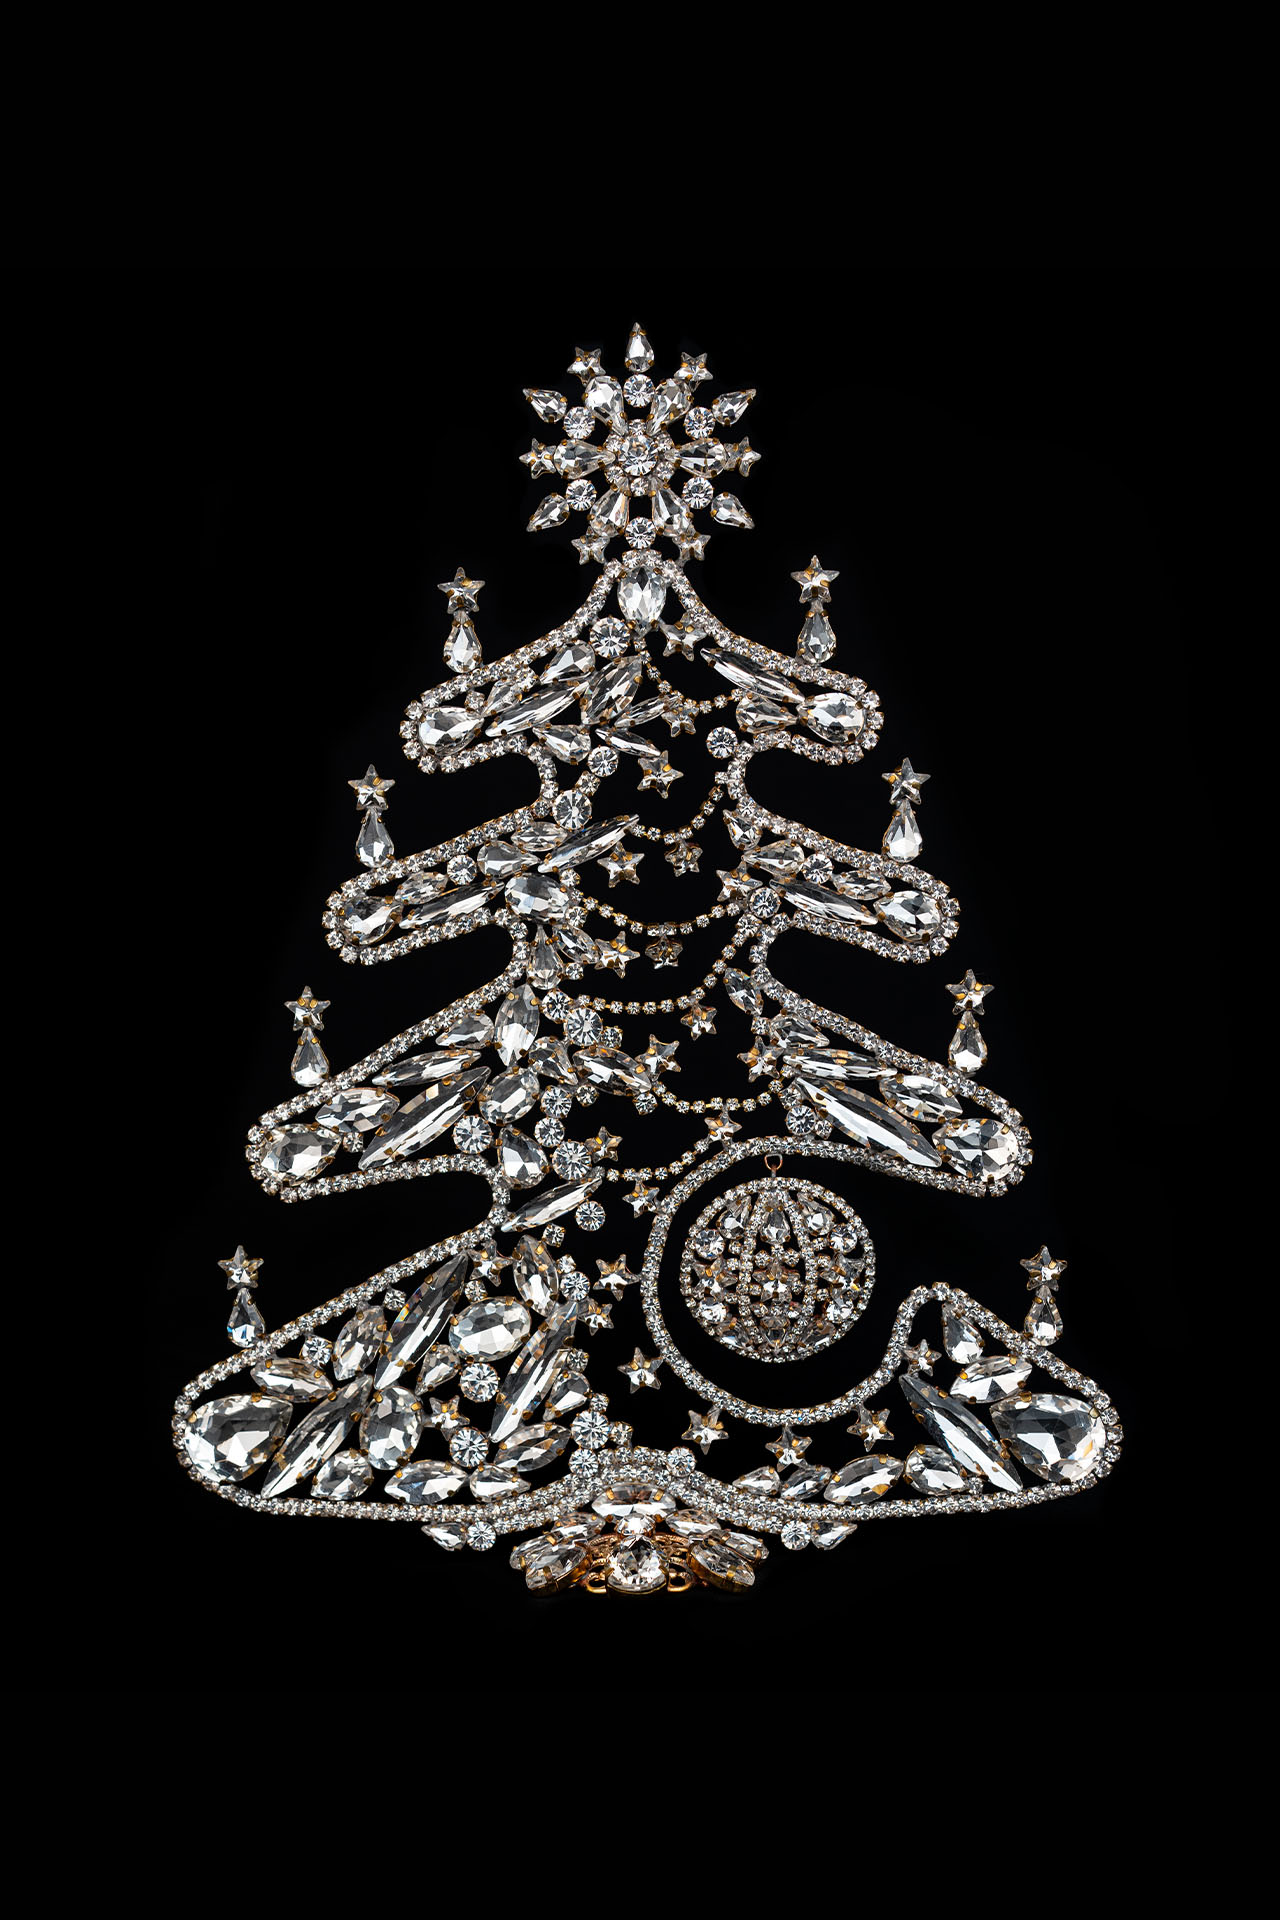 Glittering rhinestone Christmas tree in the shape of a gingerbread